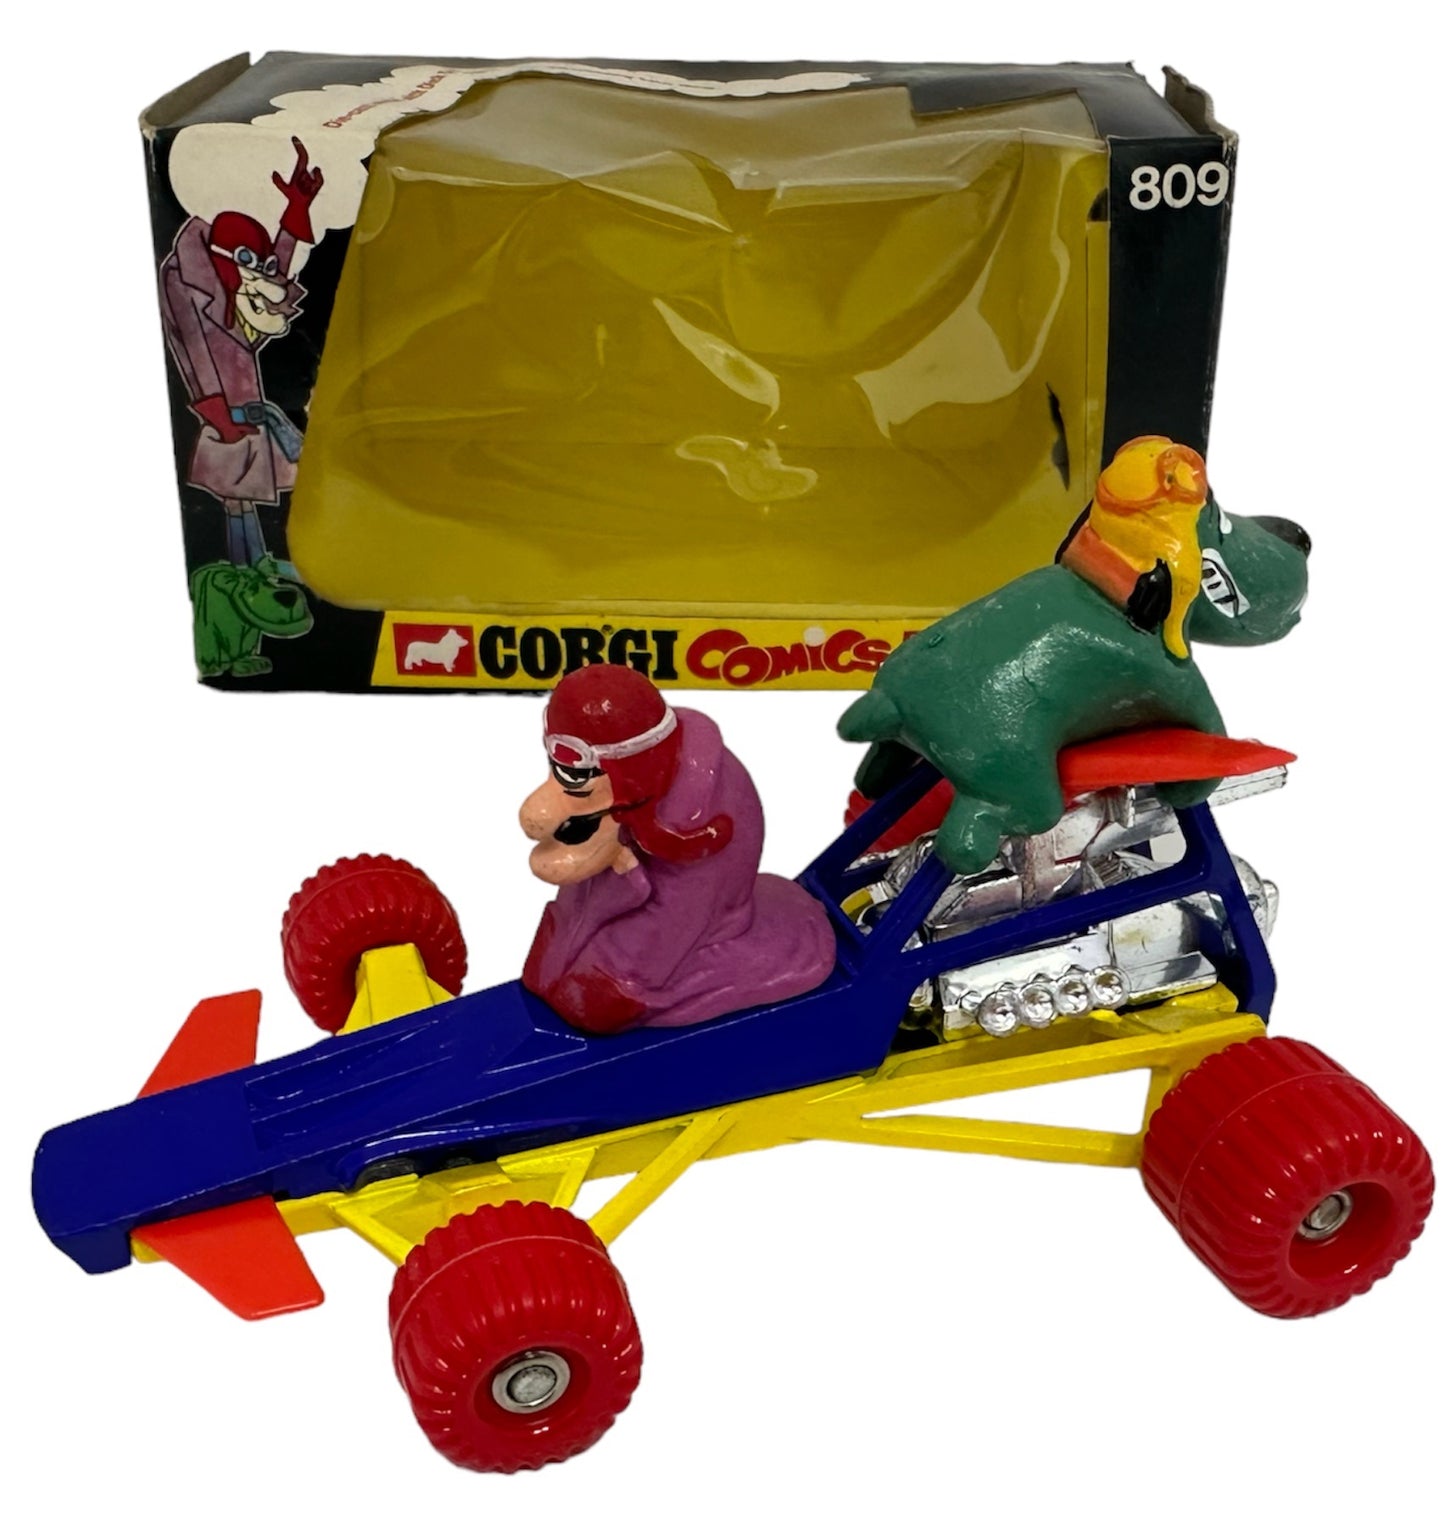 Vintage Corgis Comics 1973 Dick Dastardly Racing Car Diecast Model No. 809 With Muttley - Wacky Racers - Mint Condition In The Original Box - Shop Stock Room Find